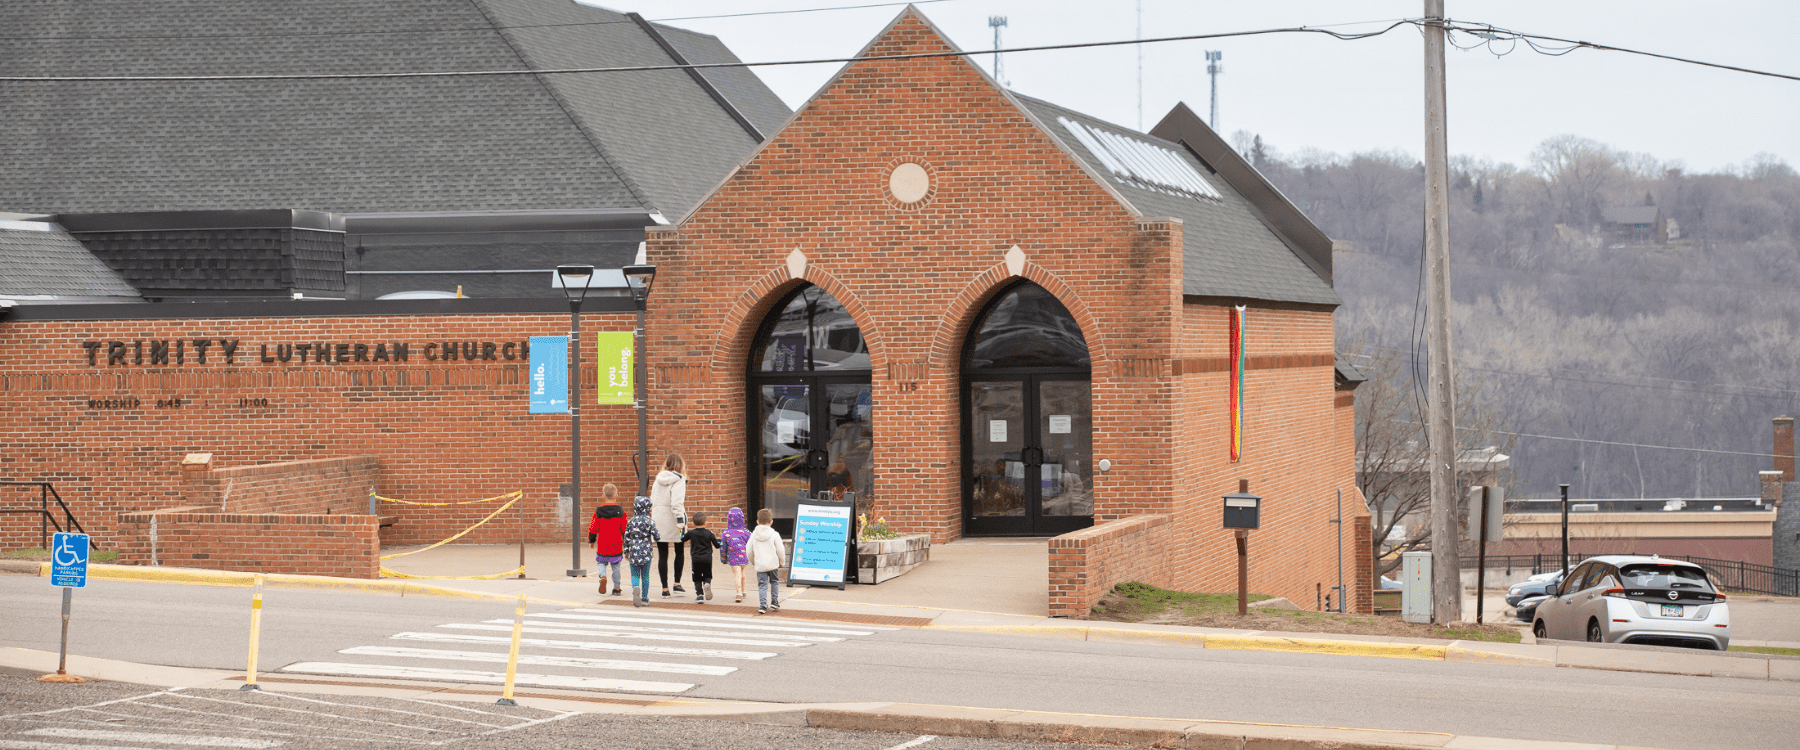 Trinity Lutheran's Discovery Center in Stillwater